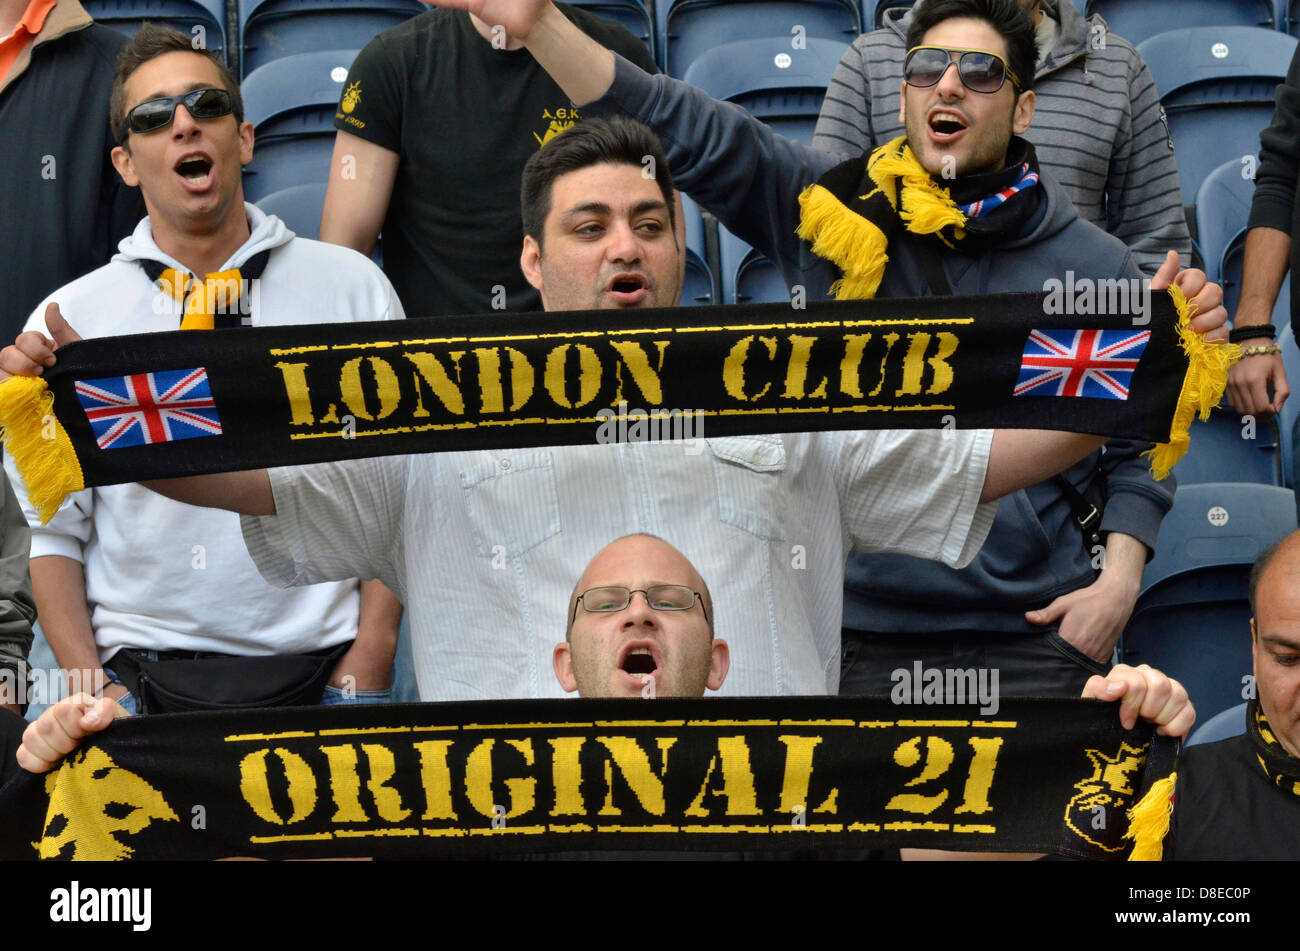 Aek Athens London Supporters Club High Resolution Stock Photography and  Images - Alamy